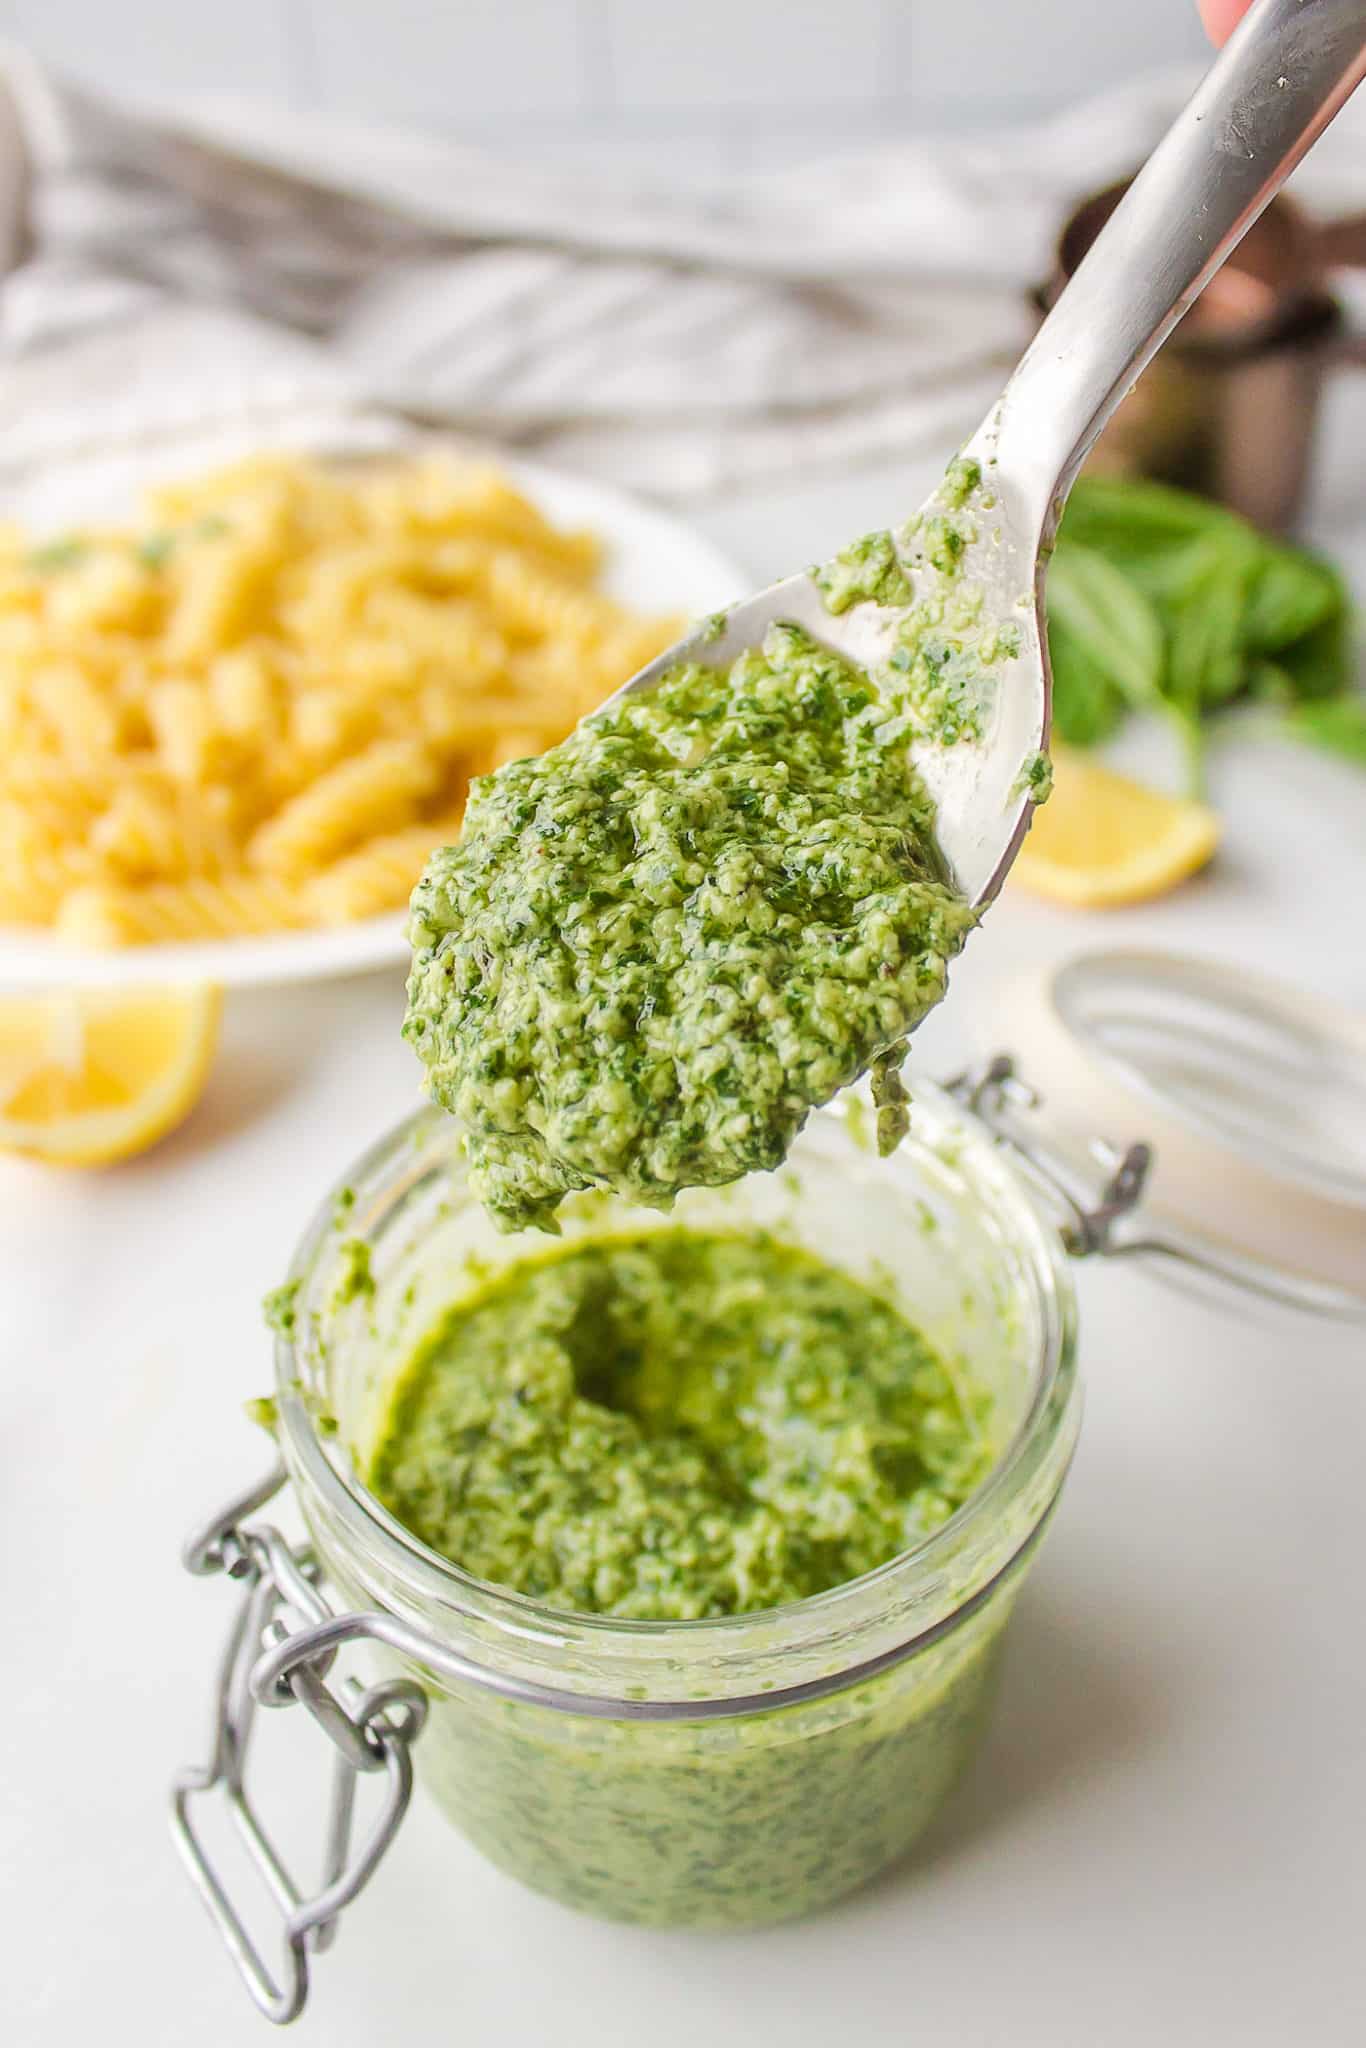 A spoon holding up a scoop of dairy free pesto from a glass jar.